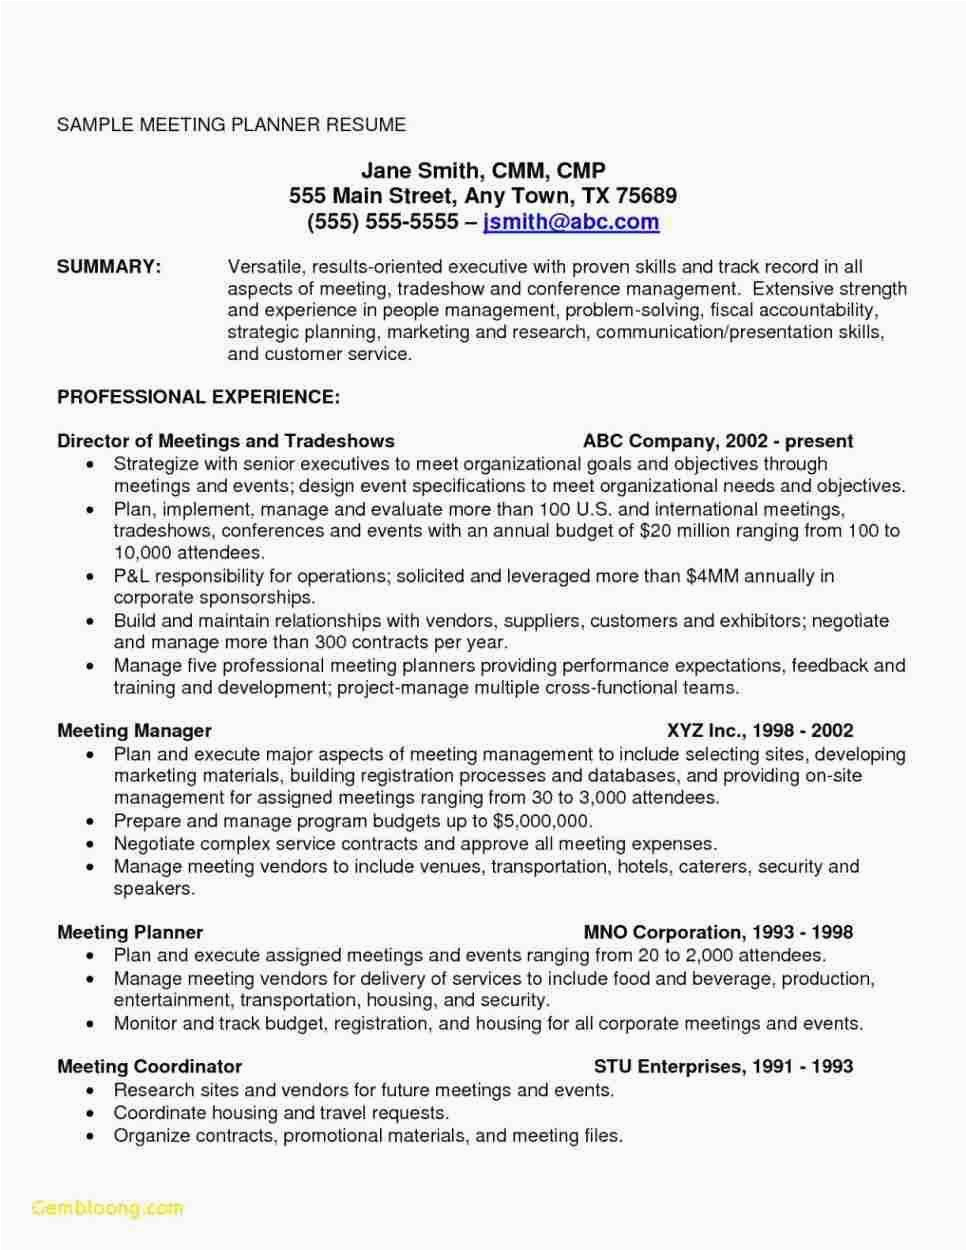 Sample Resume with Onsite Work Experience 65 Cool Collection Sample Resume Site Experience